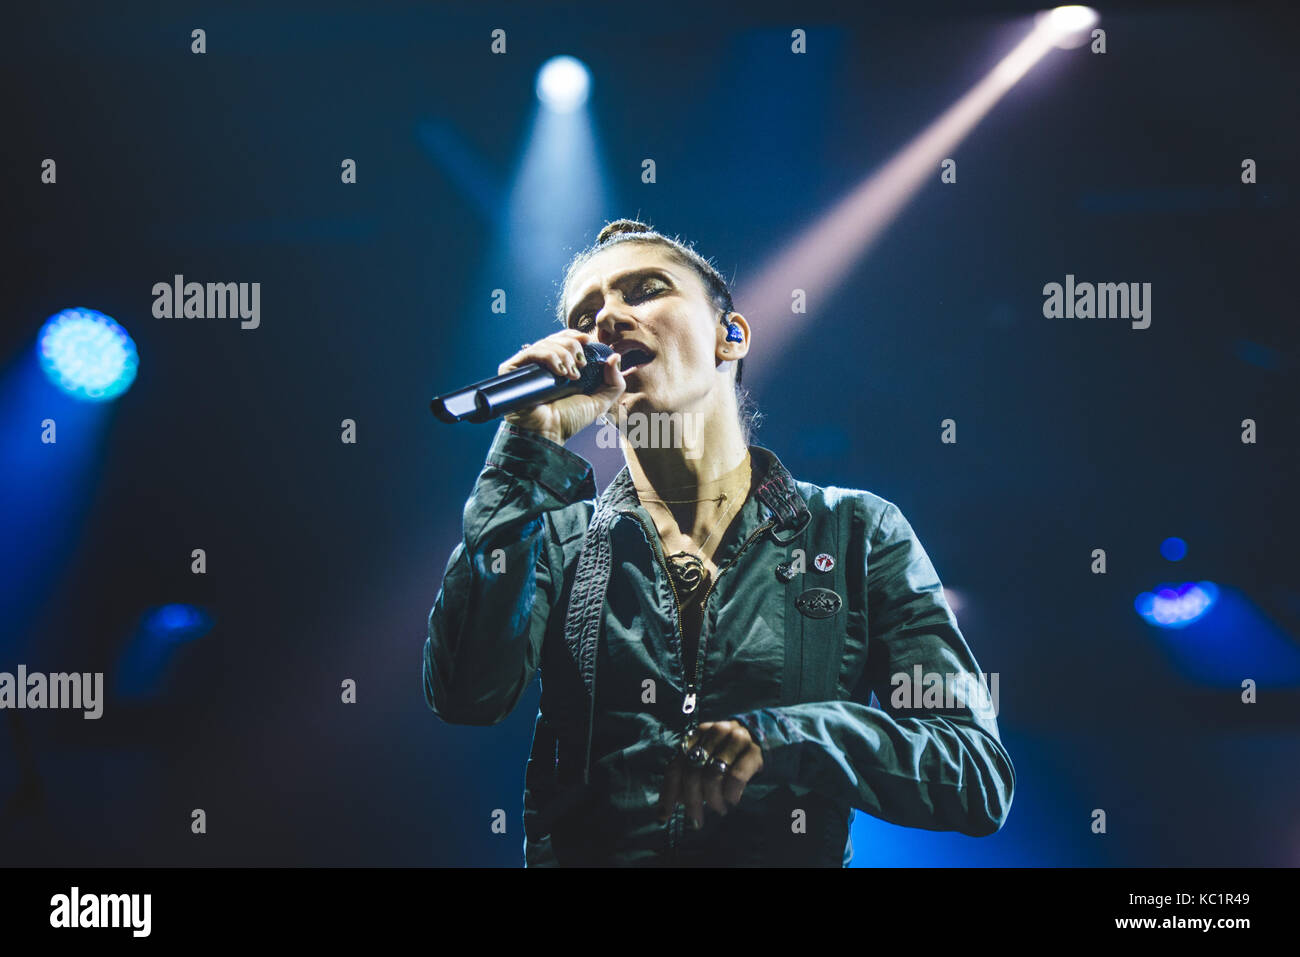 Torino, Italy. 01st Oct, 2017. Torino, 2017, Sep 30th: The italian singer/song-writer Elisa performing live on stage at the Officine Grandi Riparazioni Credit: Alessandro Bosio/Alamy Live News Stock Photo